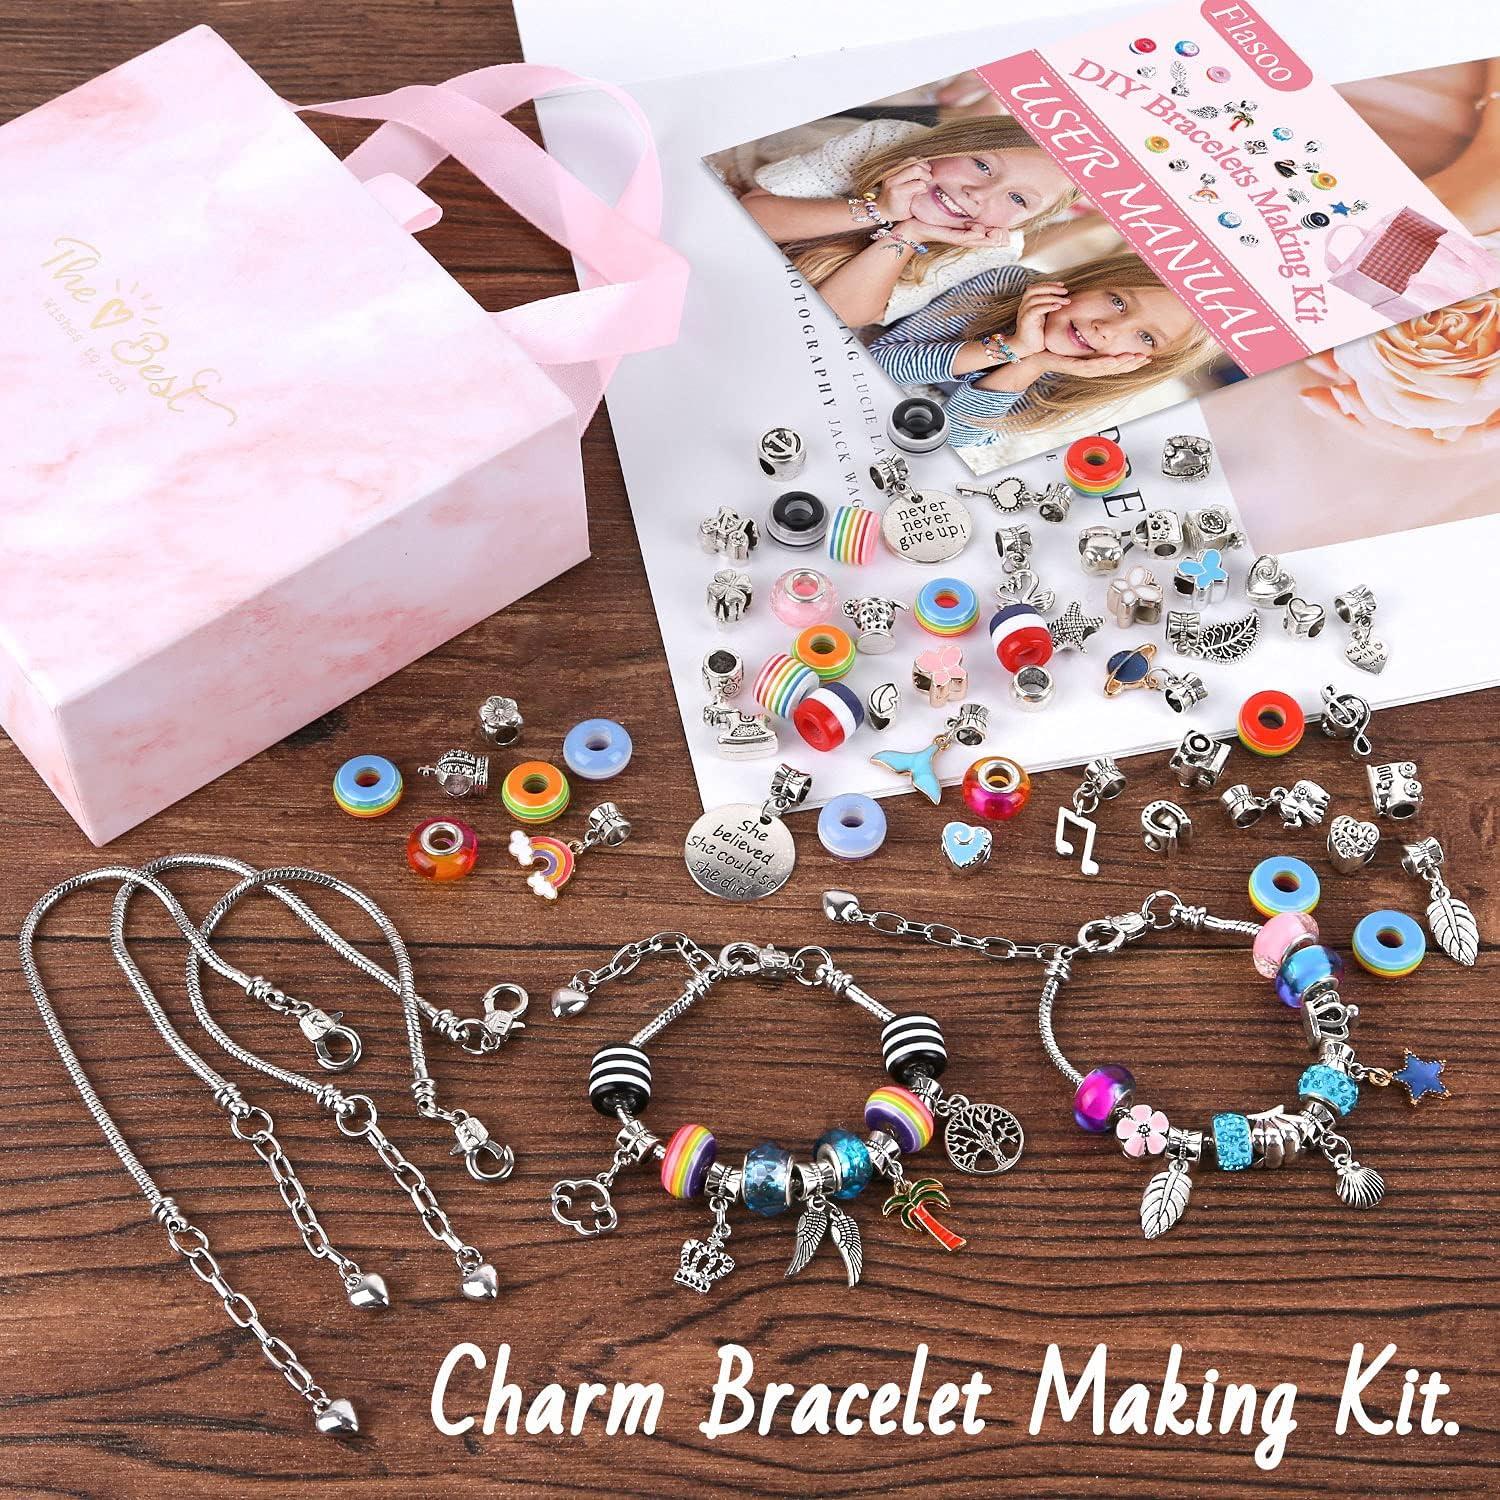 Bracelet Making Kit for Girls Flasoo 85PCs Charm Bracelets Kit with Beads Jewelry  Charms Bracelets for DIY Craft Jewelry Gift for Teen Girls